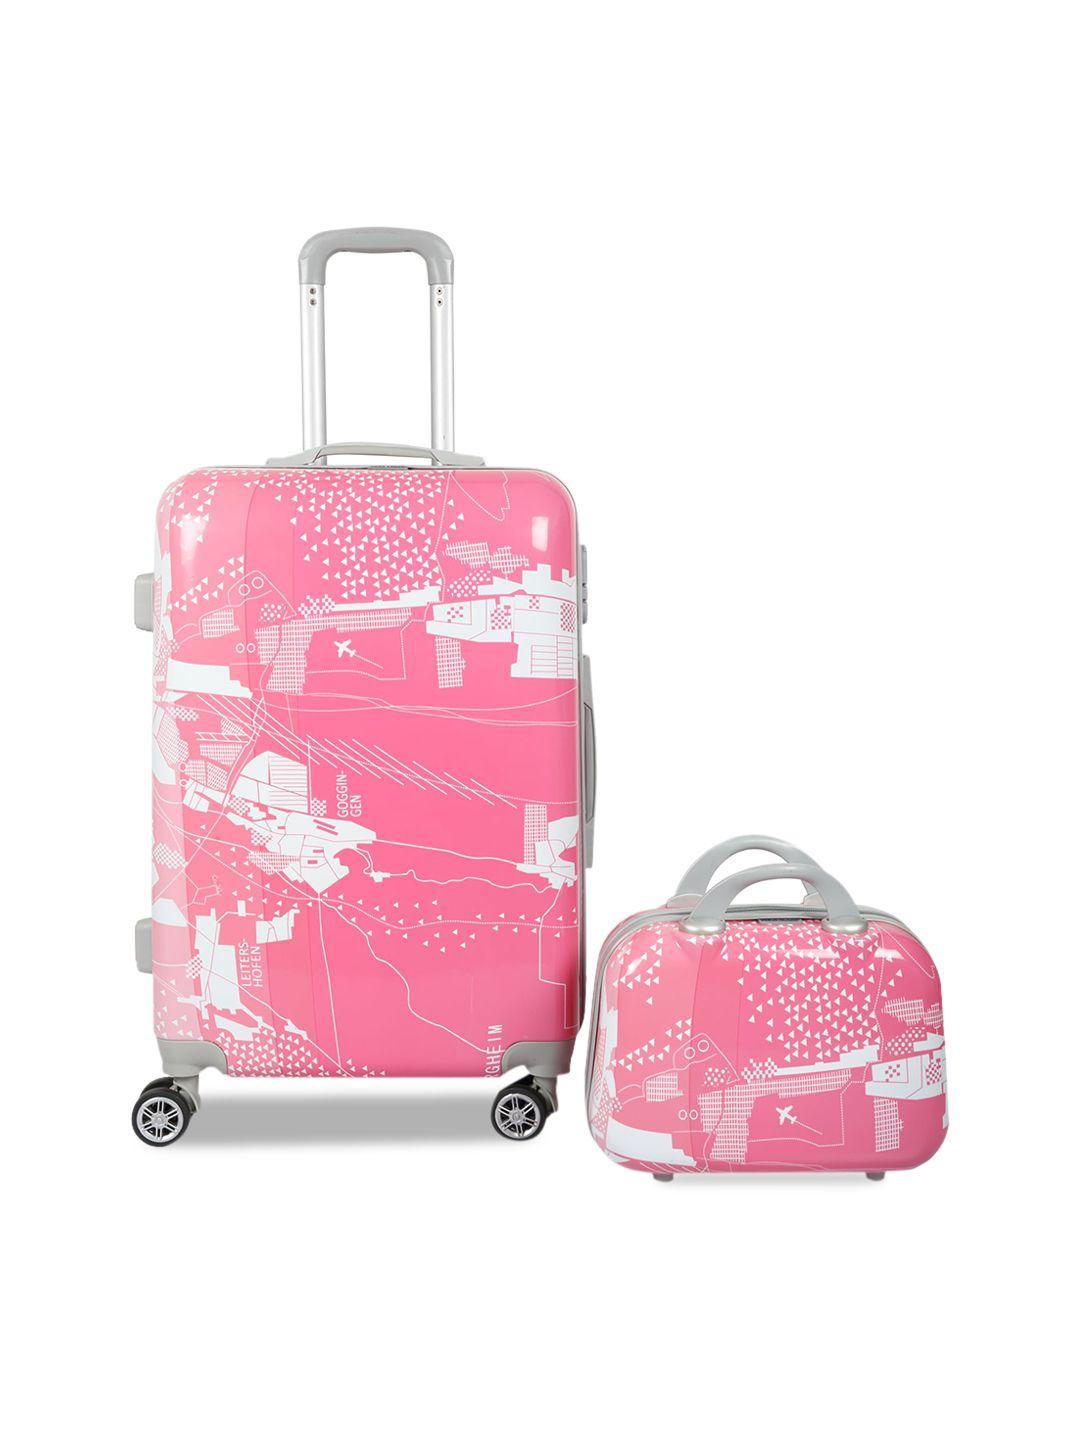 polo class printed trolley bag with vanity bag